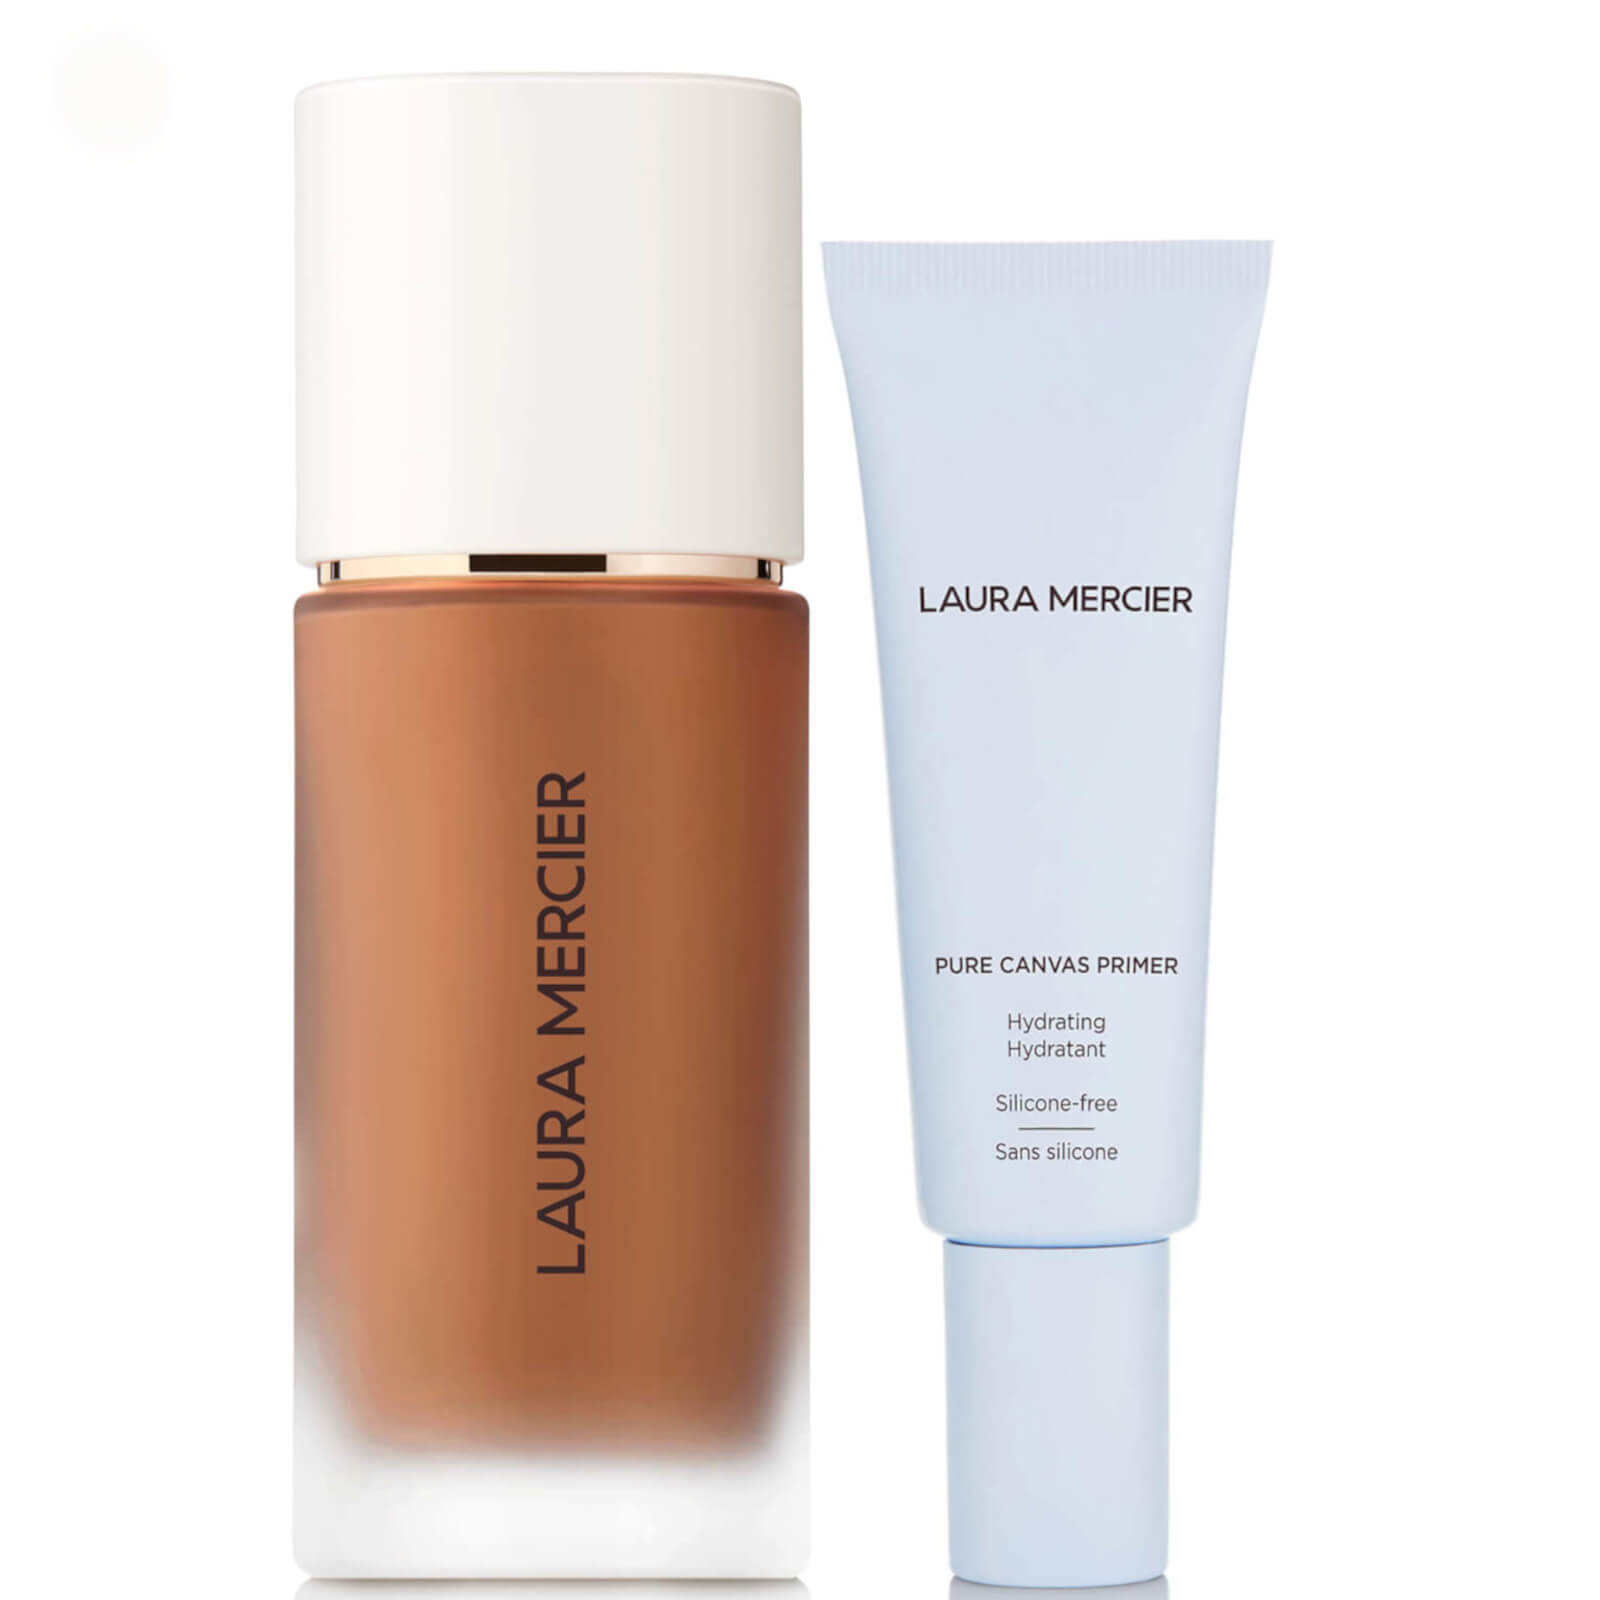 Laura Mercier Real Flawless Foundation and Pure Canvas Hydrating Primer Bundle (Various Shades) - 5C1 Sepia